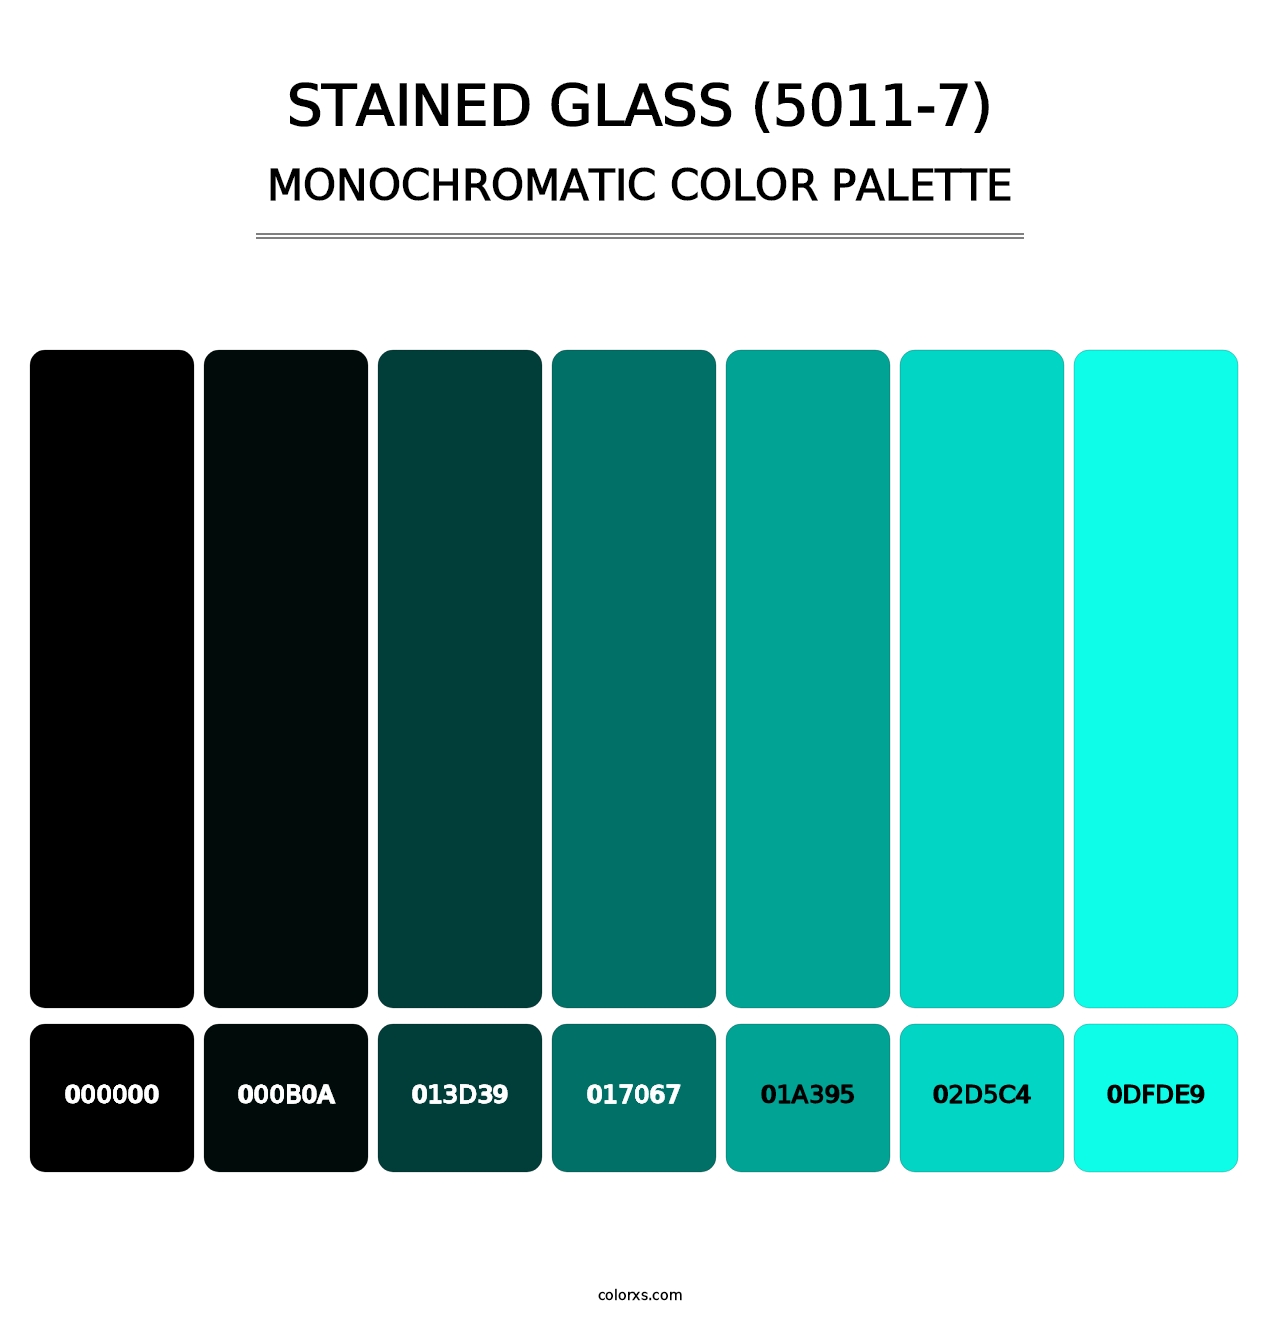 Stained Glass (5011-7) - Monochromatic Color Palette